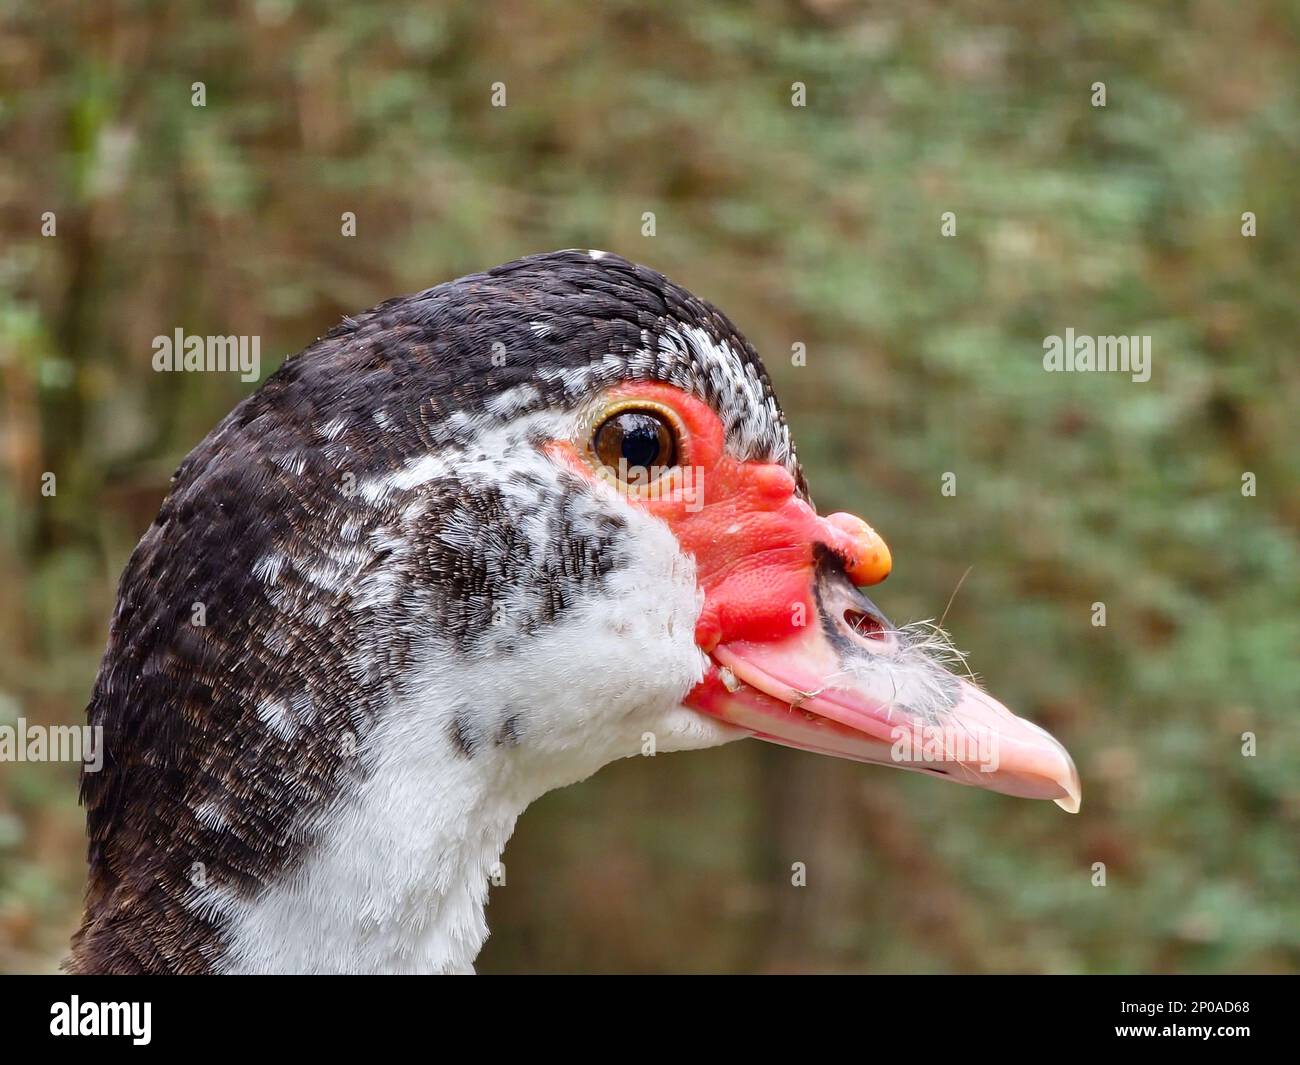 Close up of a white and black Muscovy duck with a pink face and beak. Photographed in profile with a shallow depth of field. Stock Photo